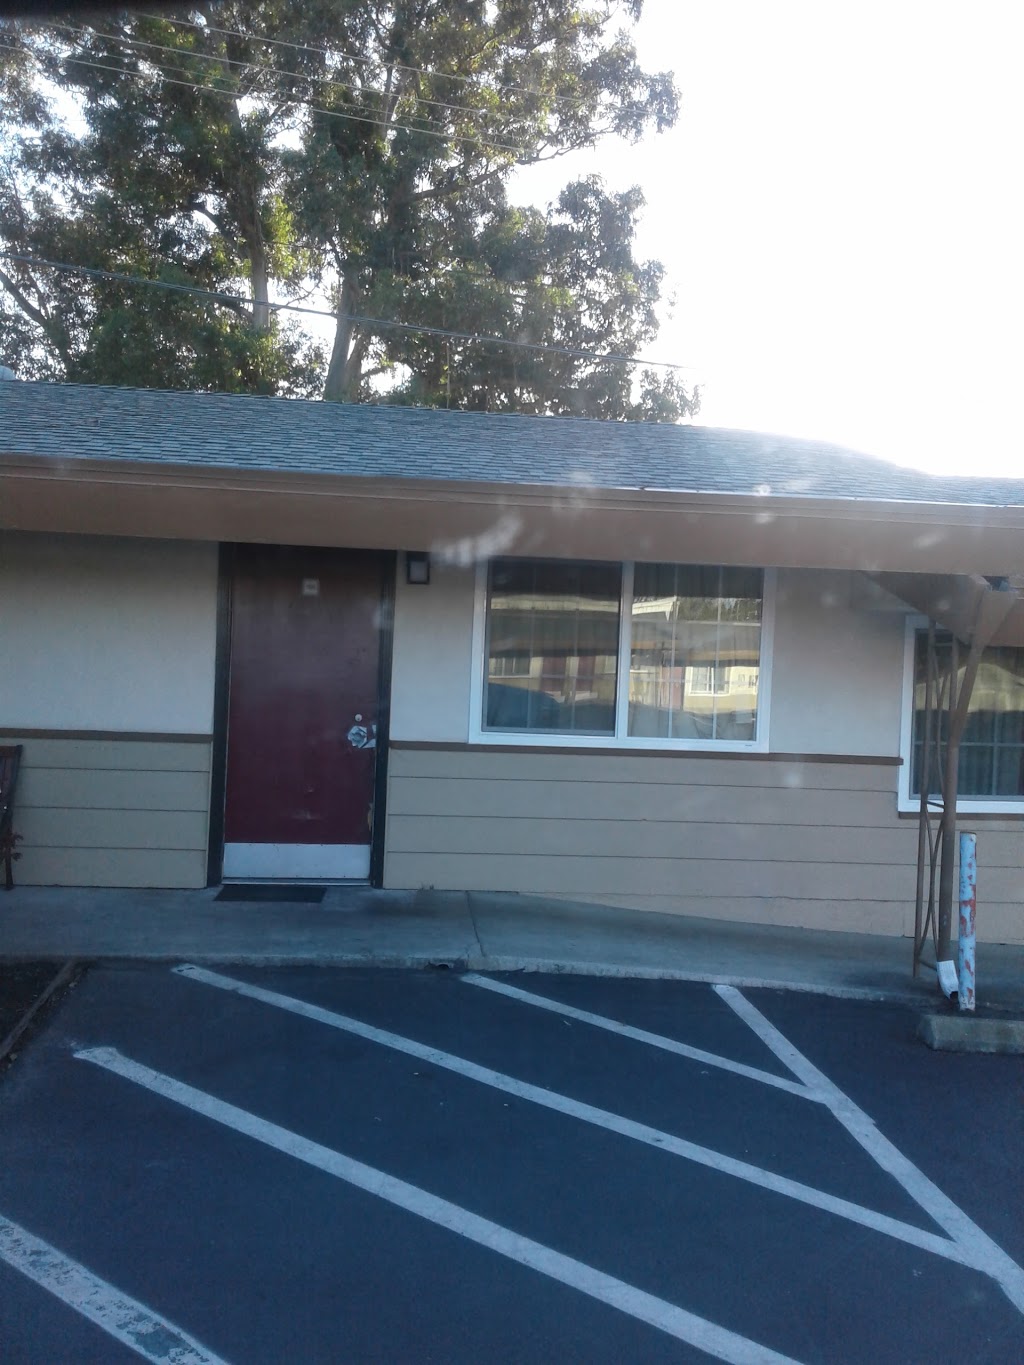 Sands Motel | 3787 First St, Livermore, CA 94551 | Phone: (925) 447-6500